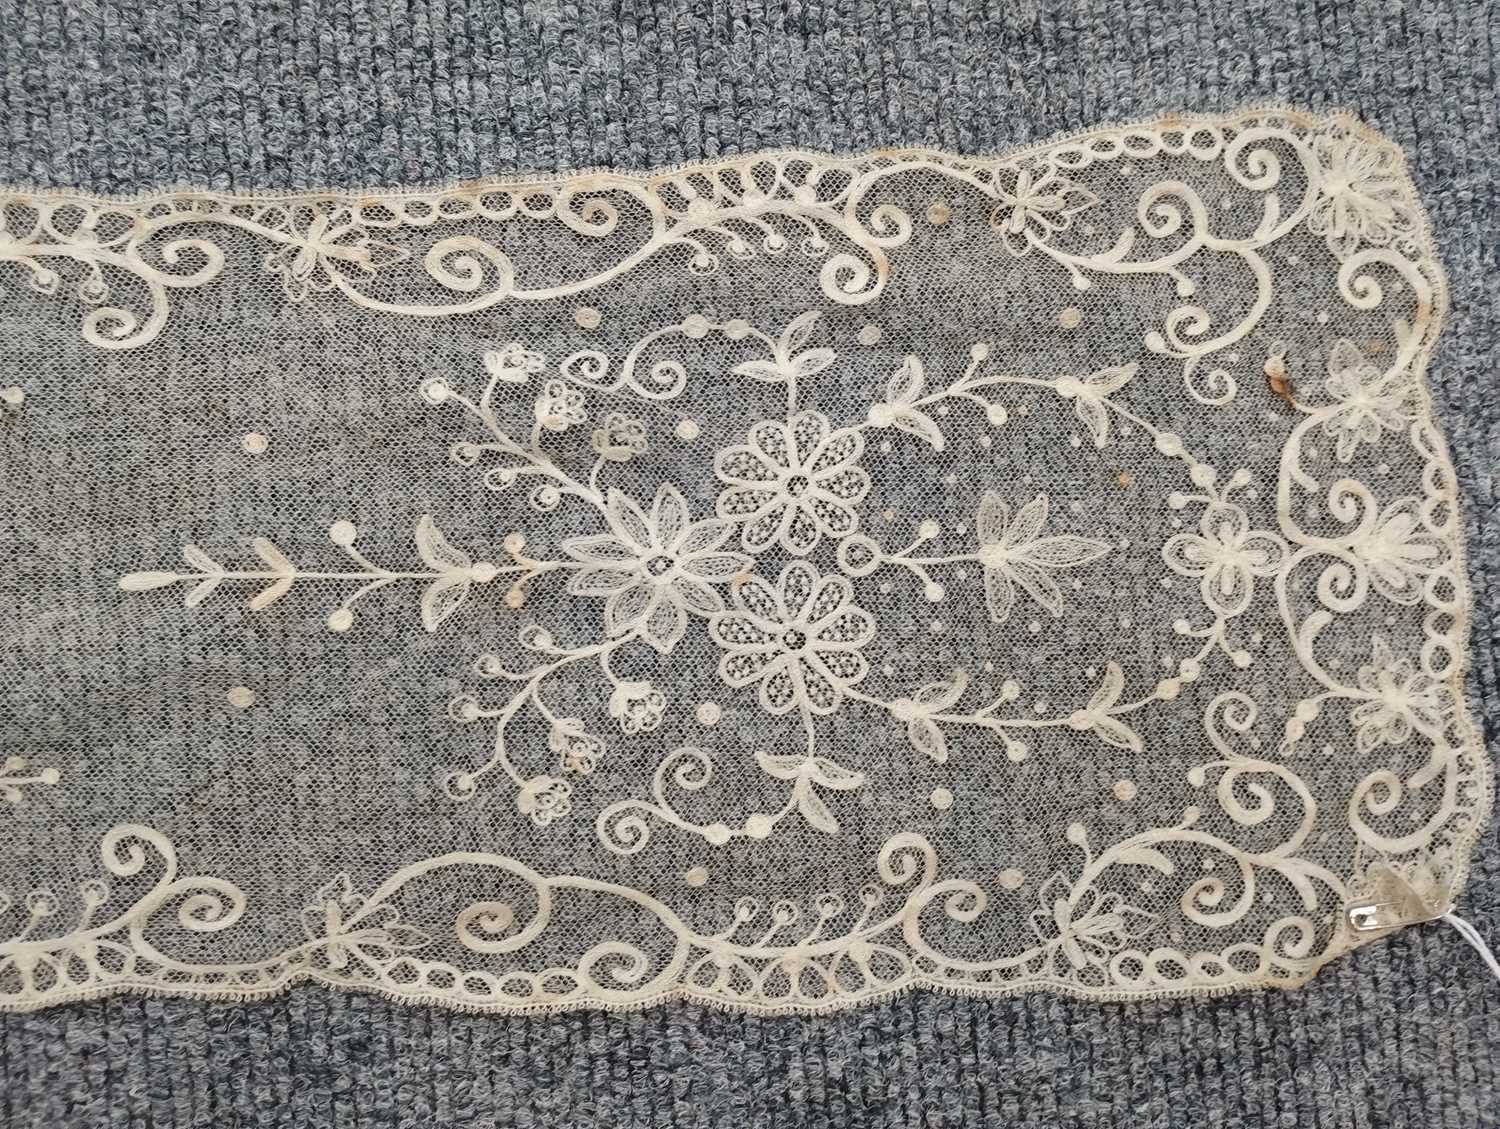 Early 20th Century Lace comprising a flounce with appliquéd flower heads and motifs within a - Image 22 of 32